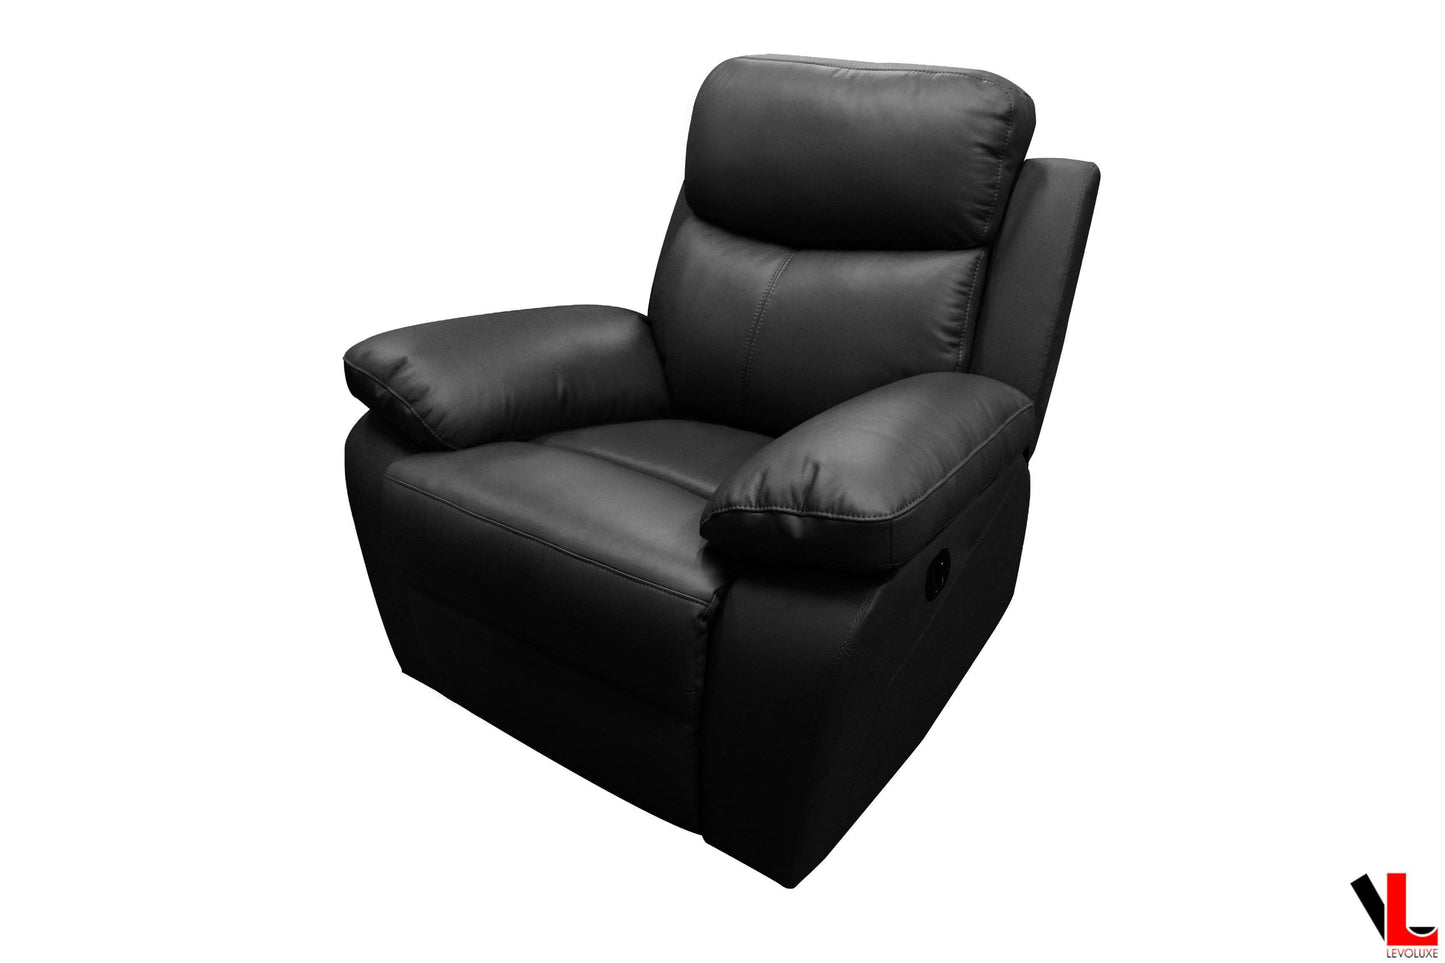 Levoluxe Chair Aveon 38.5" Pillow Top Arm Reclining Chair in Leather Match - Available in 2 Colours